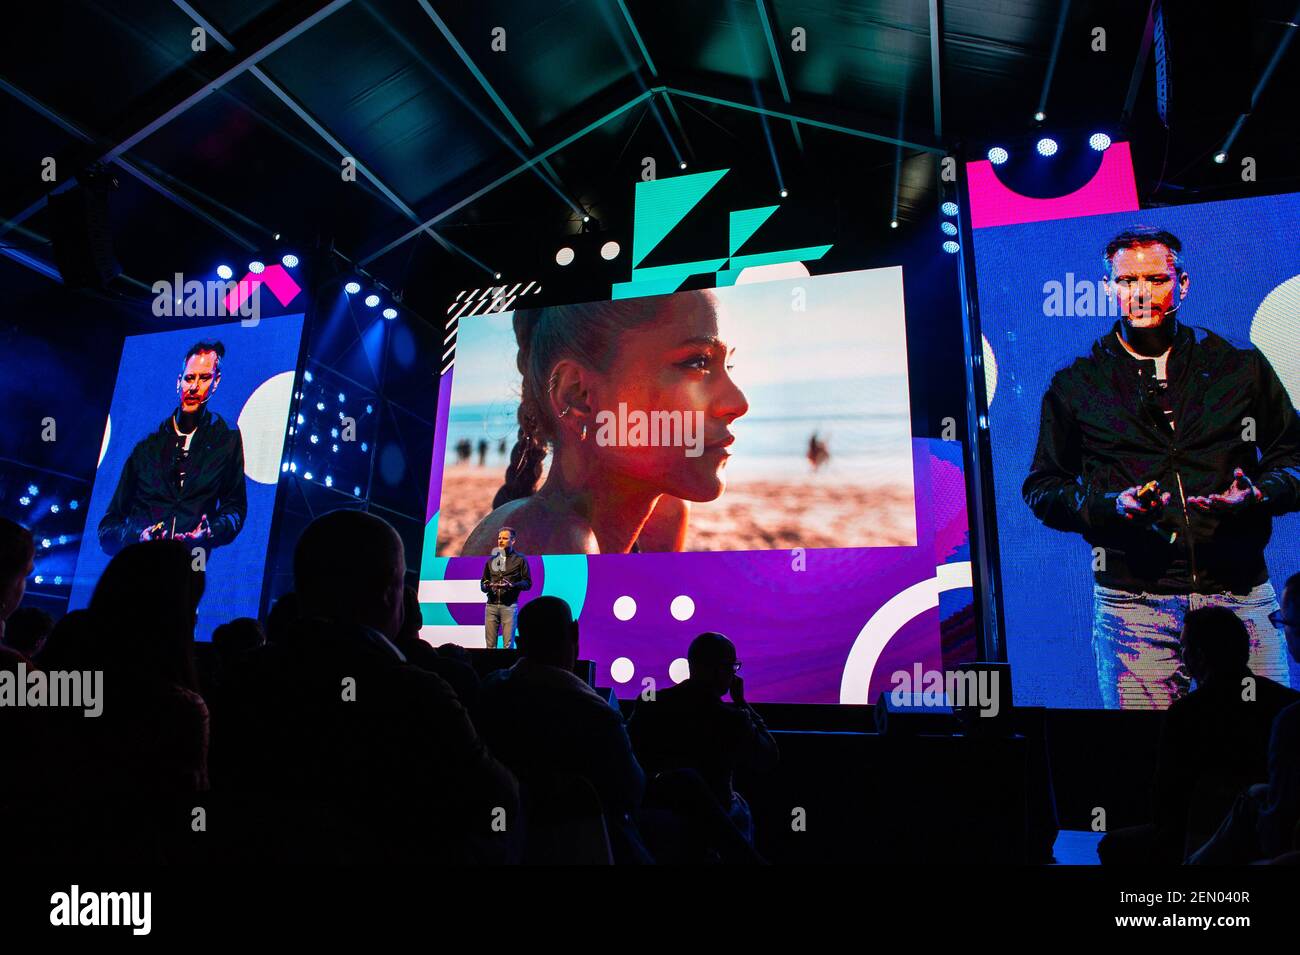 Michael Martin from Nike is giving a talk during the TNW Conferences in  Amsterdam, on May 9th, 2019. The 14th edition of the TNW conference was  inaugurated in Amsterdam at the NDSM,